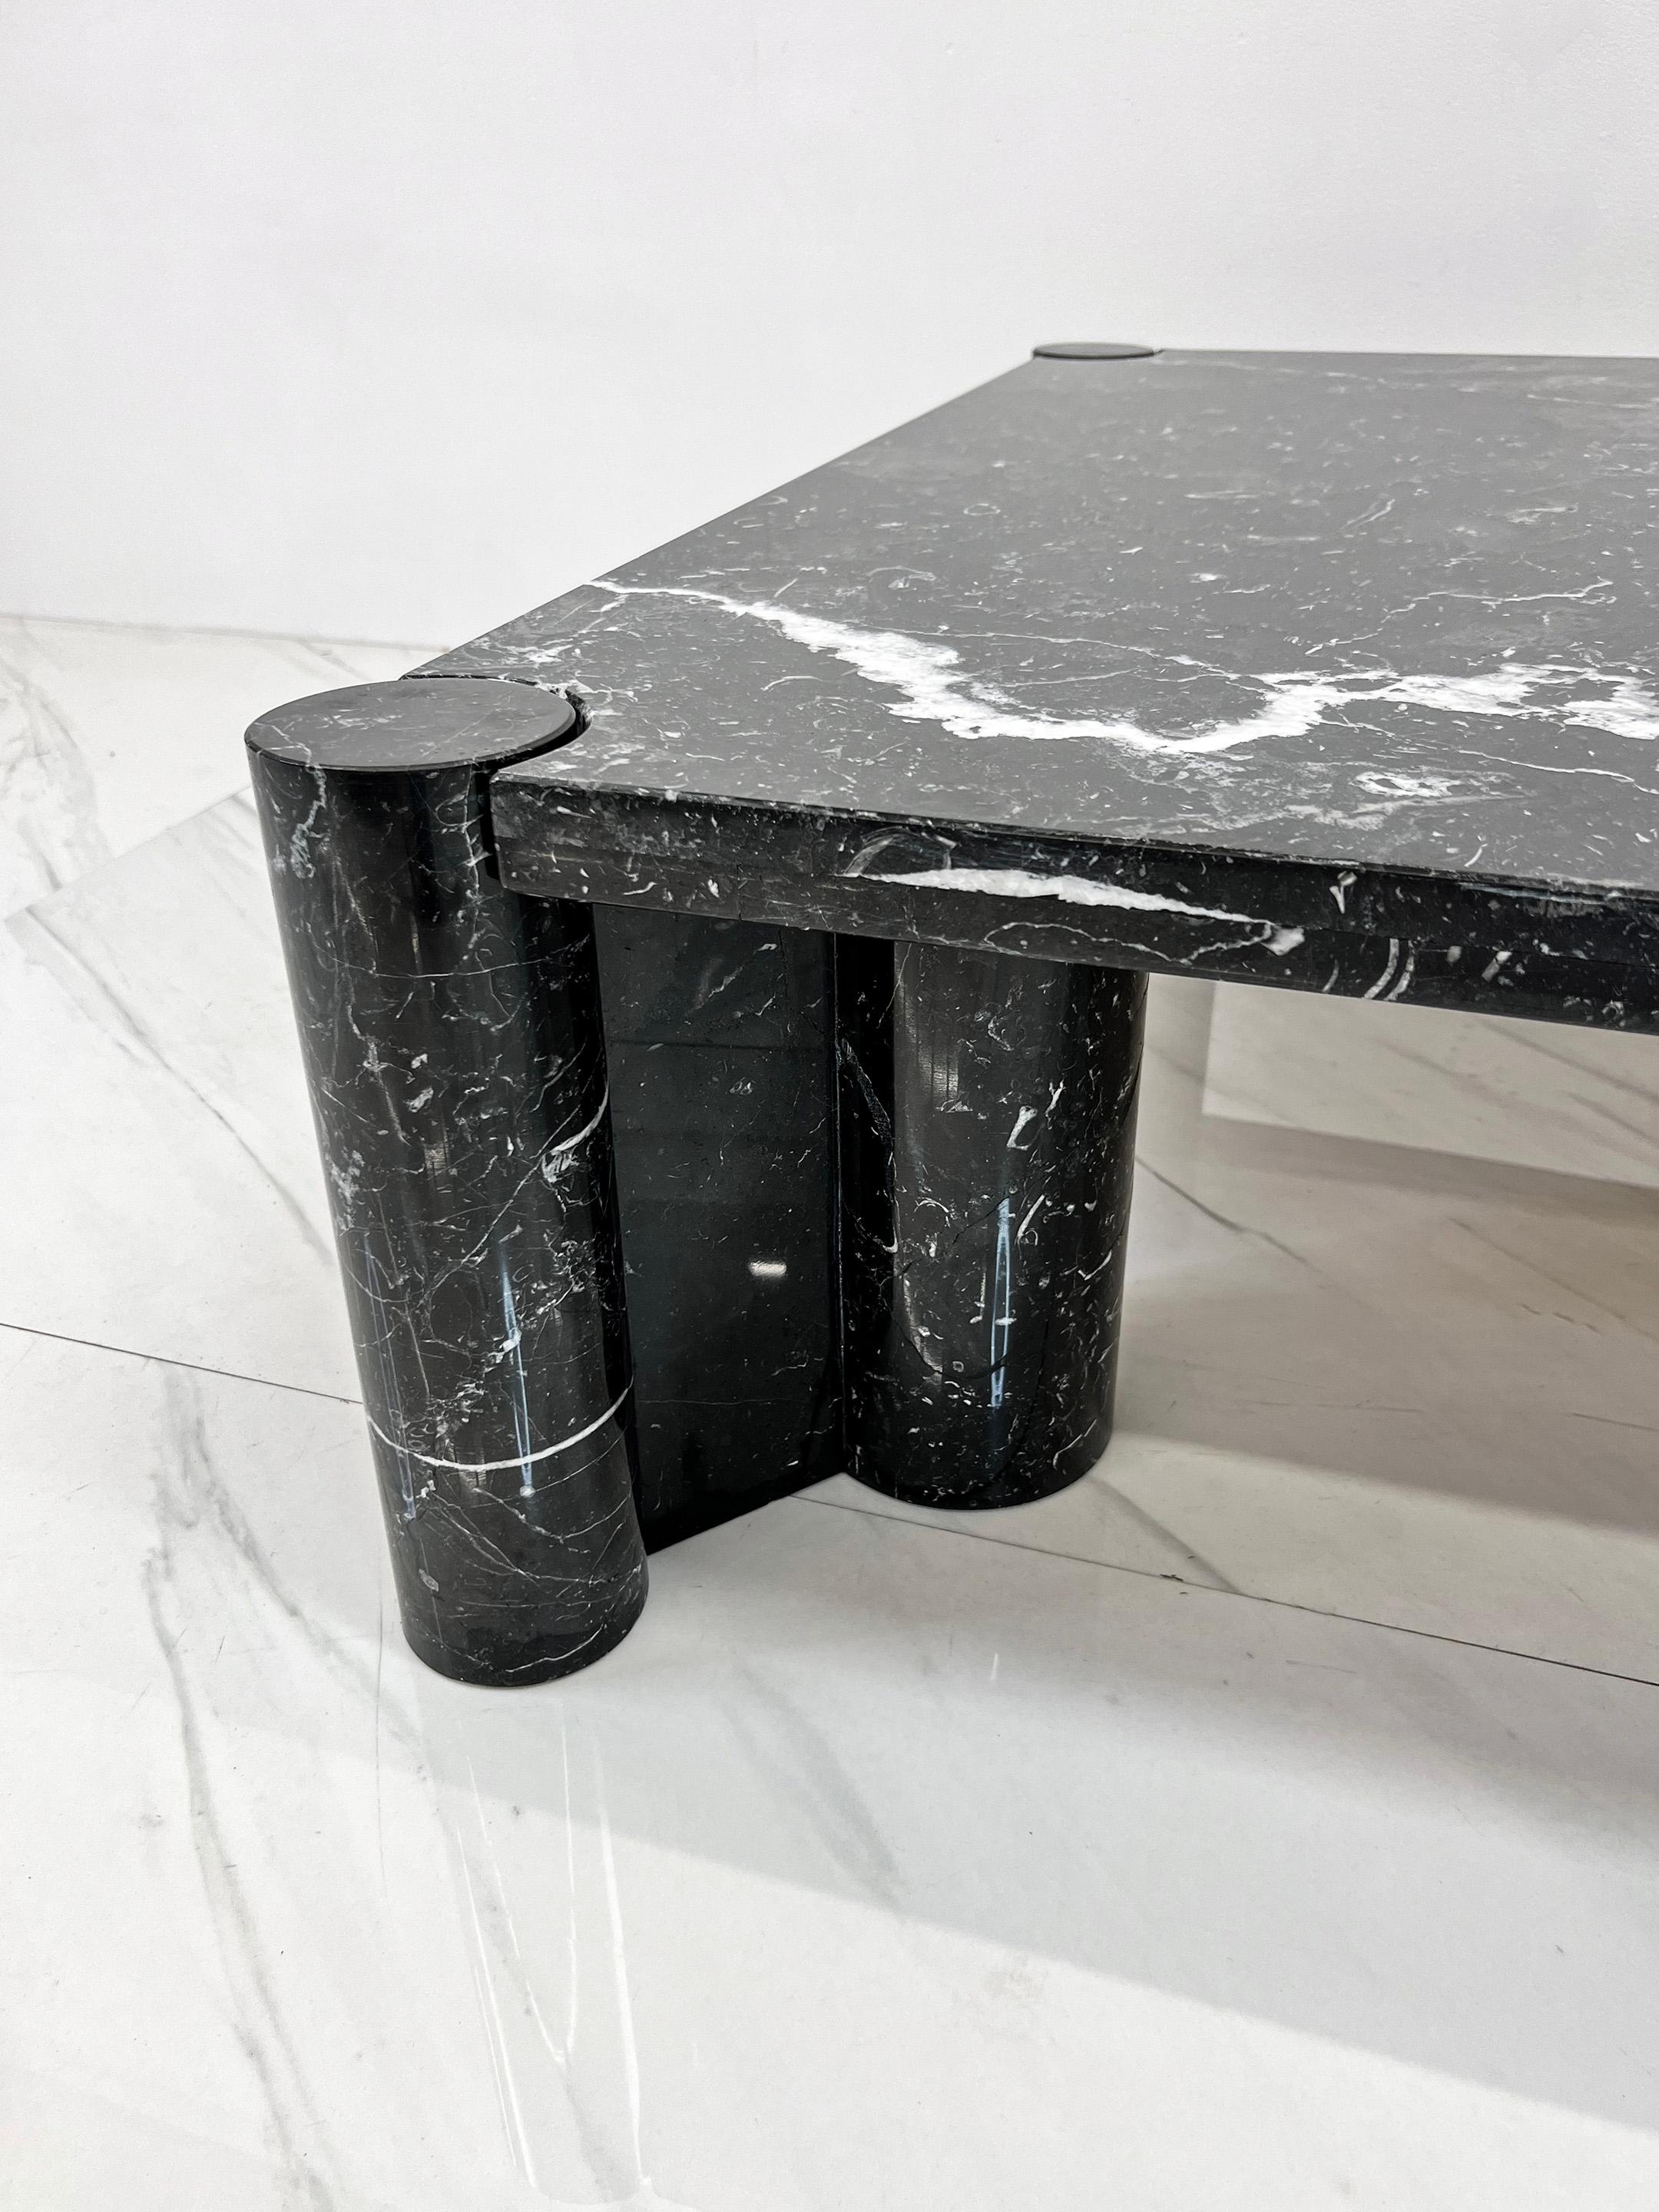 Gae Aulenti Jumbo Coffee Table for Knoll in Nero Marquina Marble In Good Condition For Sale In Culver City, CA